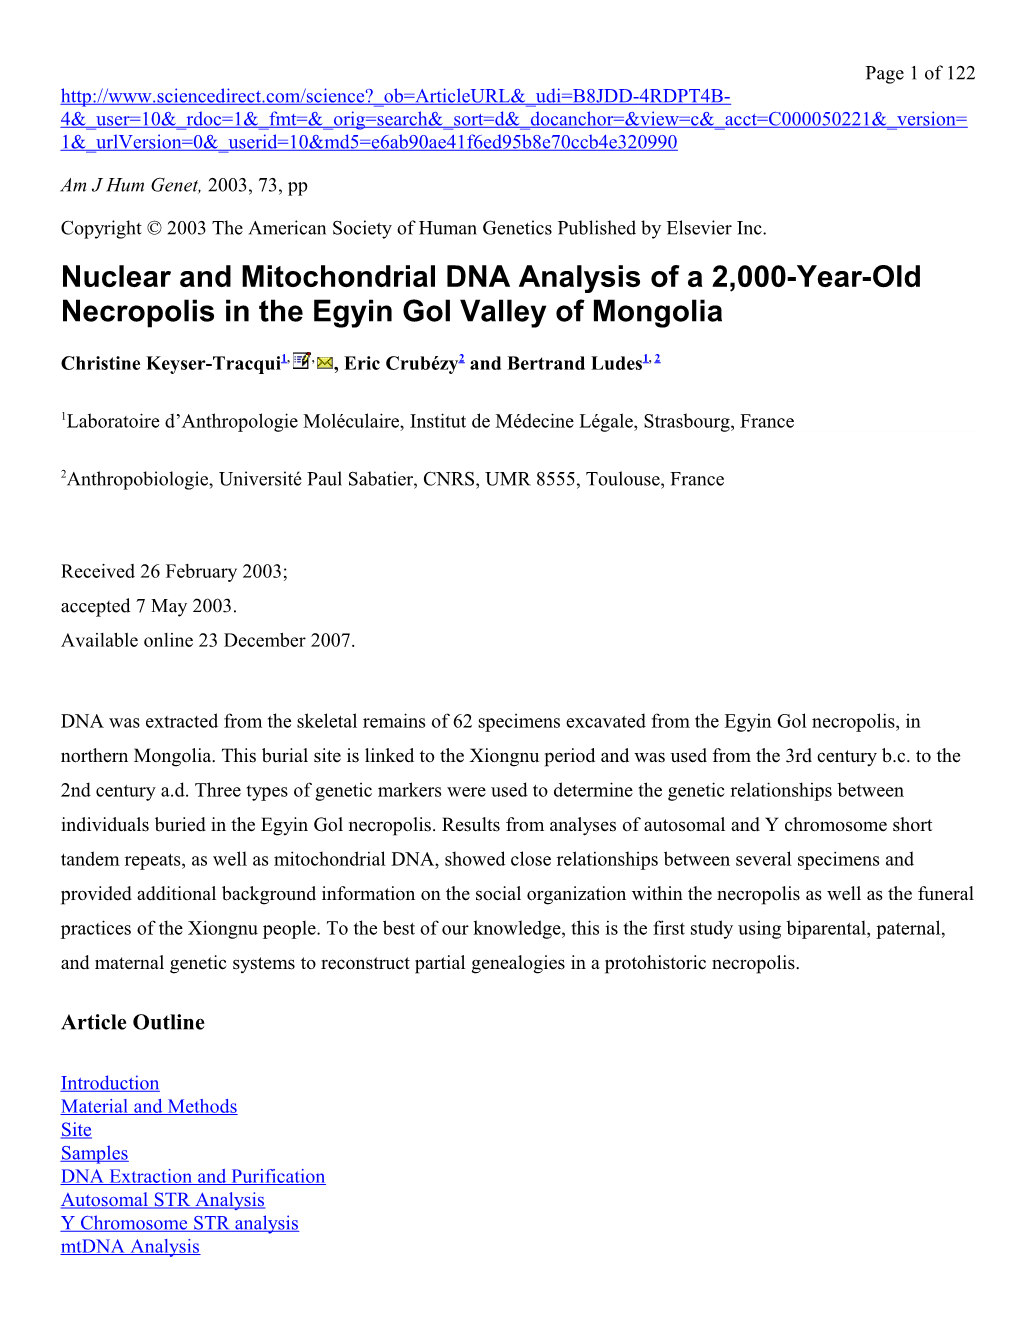 Nuclear and Mitochondrial DNA Analysis of a 2,000-Year-Old Necropolis in the Egyingolvalley